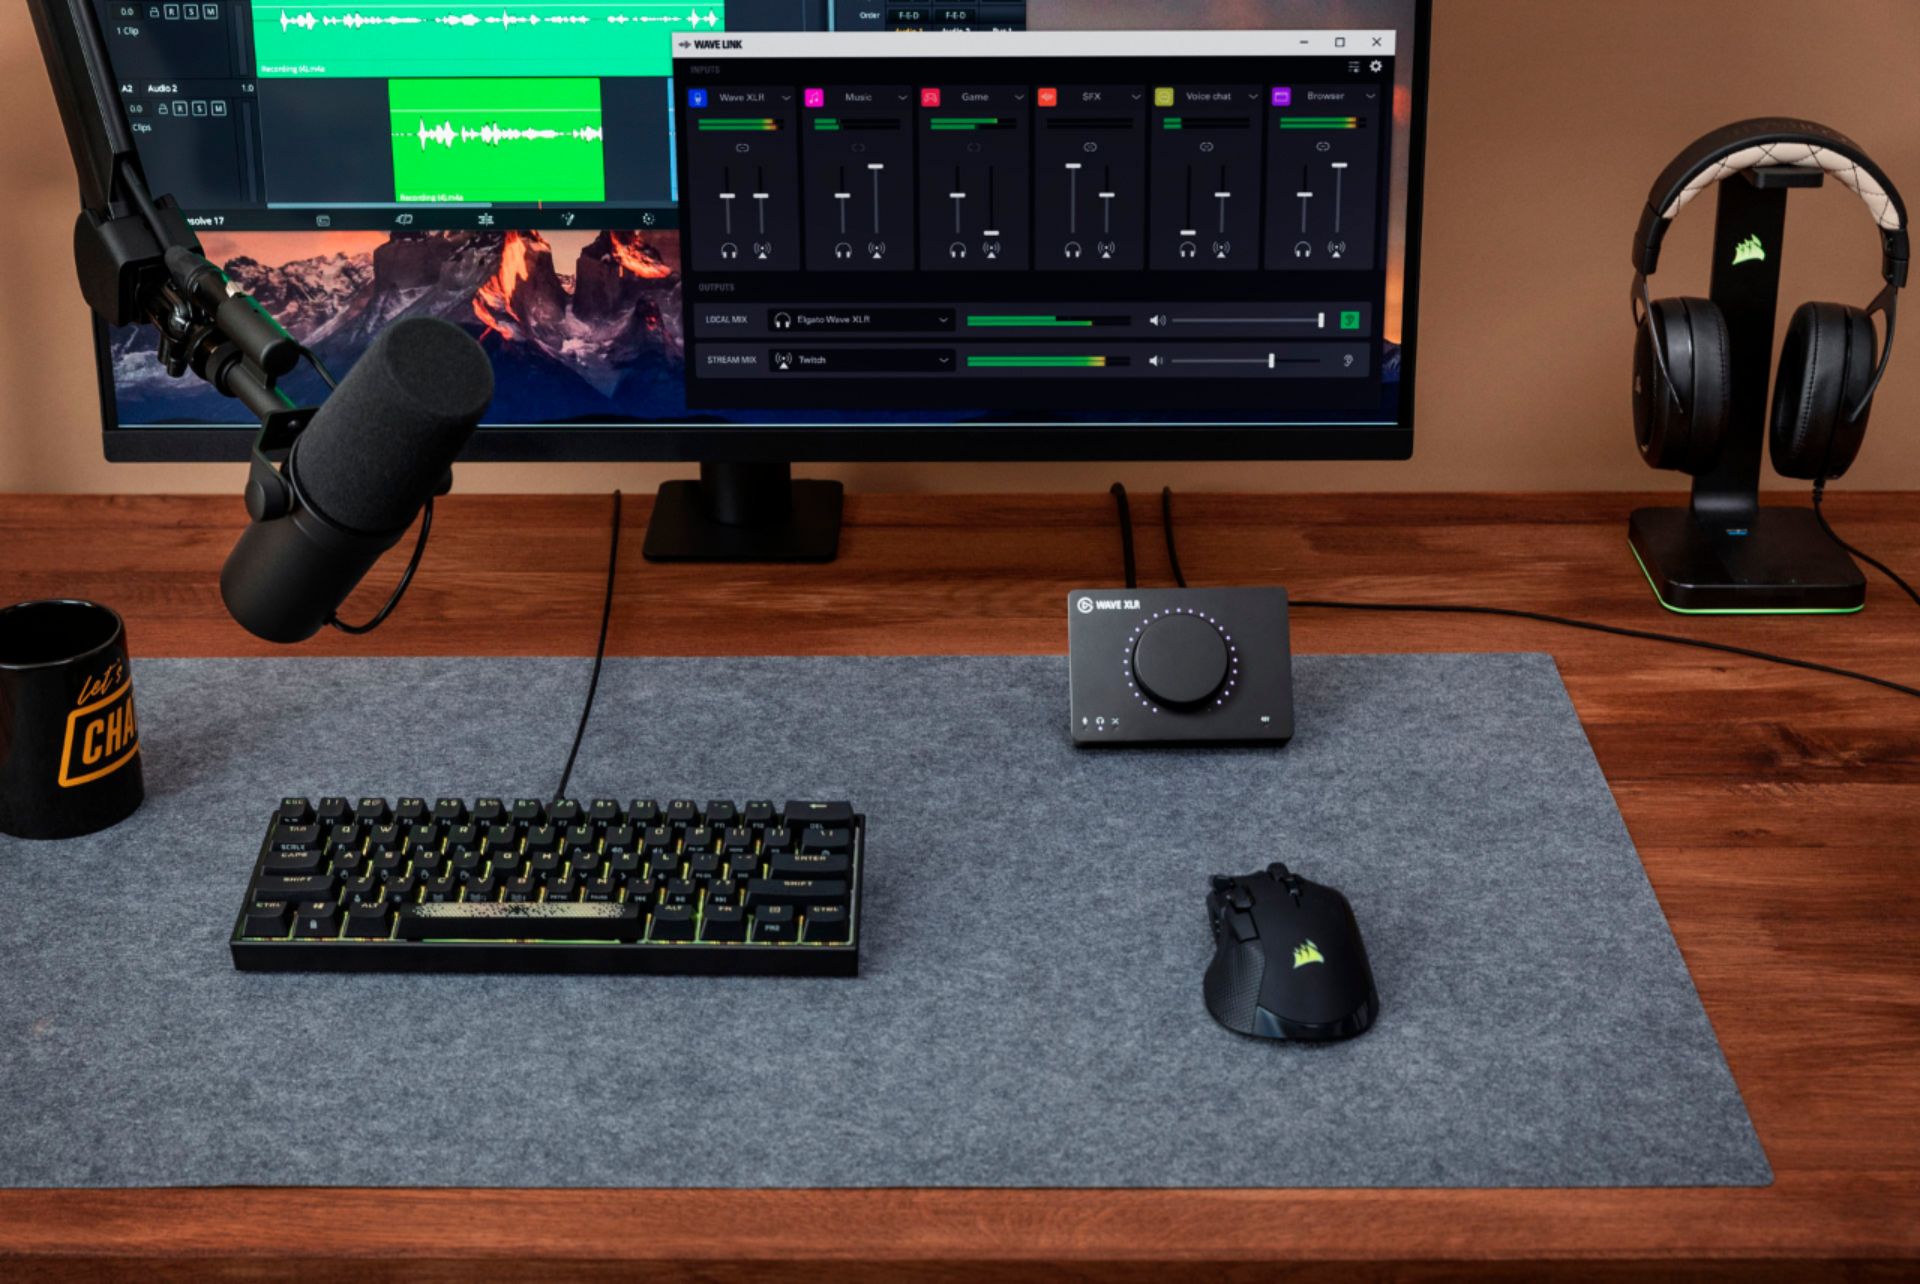 Elgato Wave XLR Streamer Interface Review / Explained 